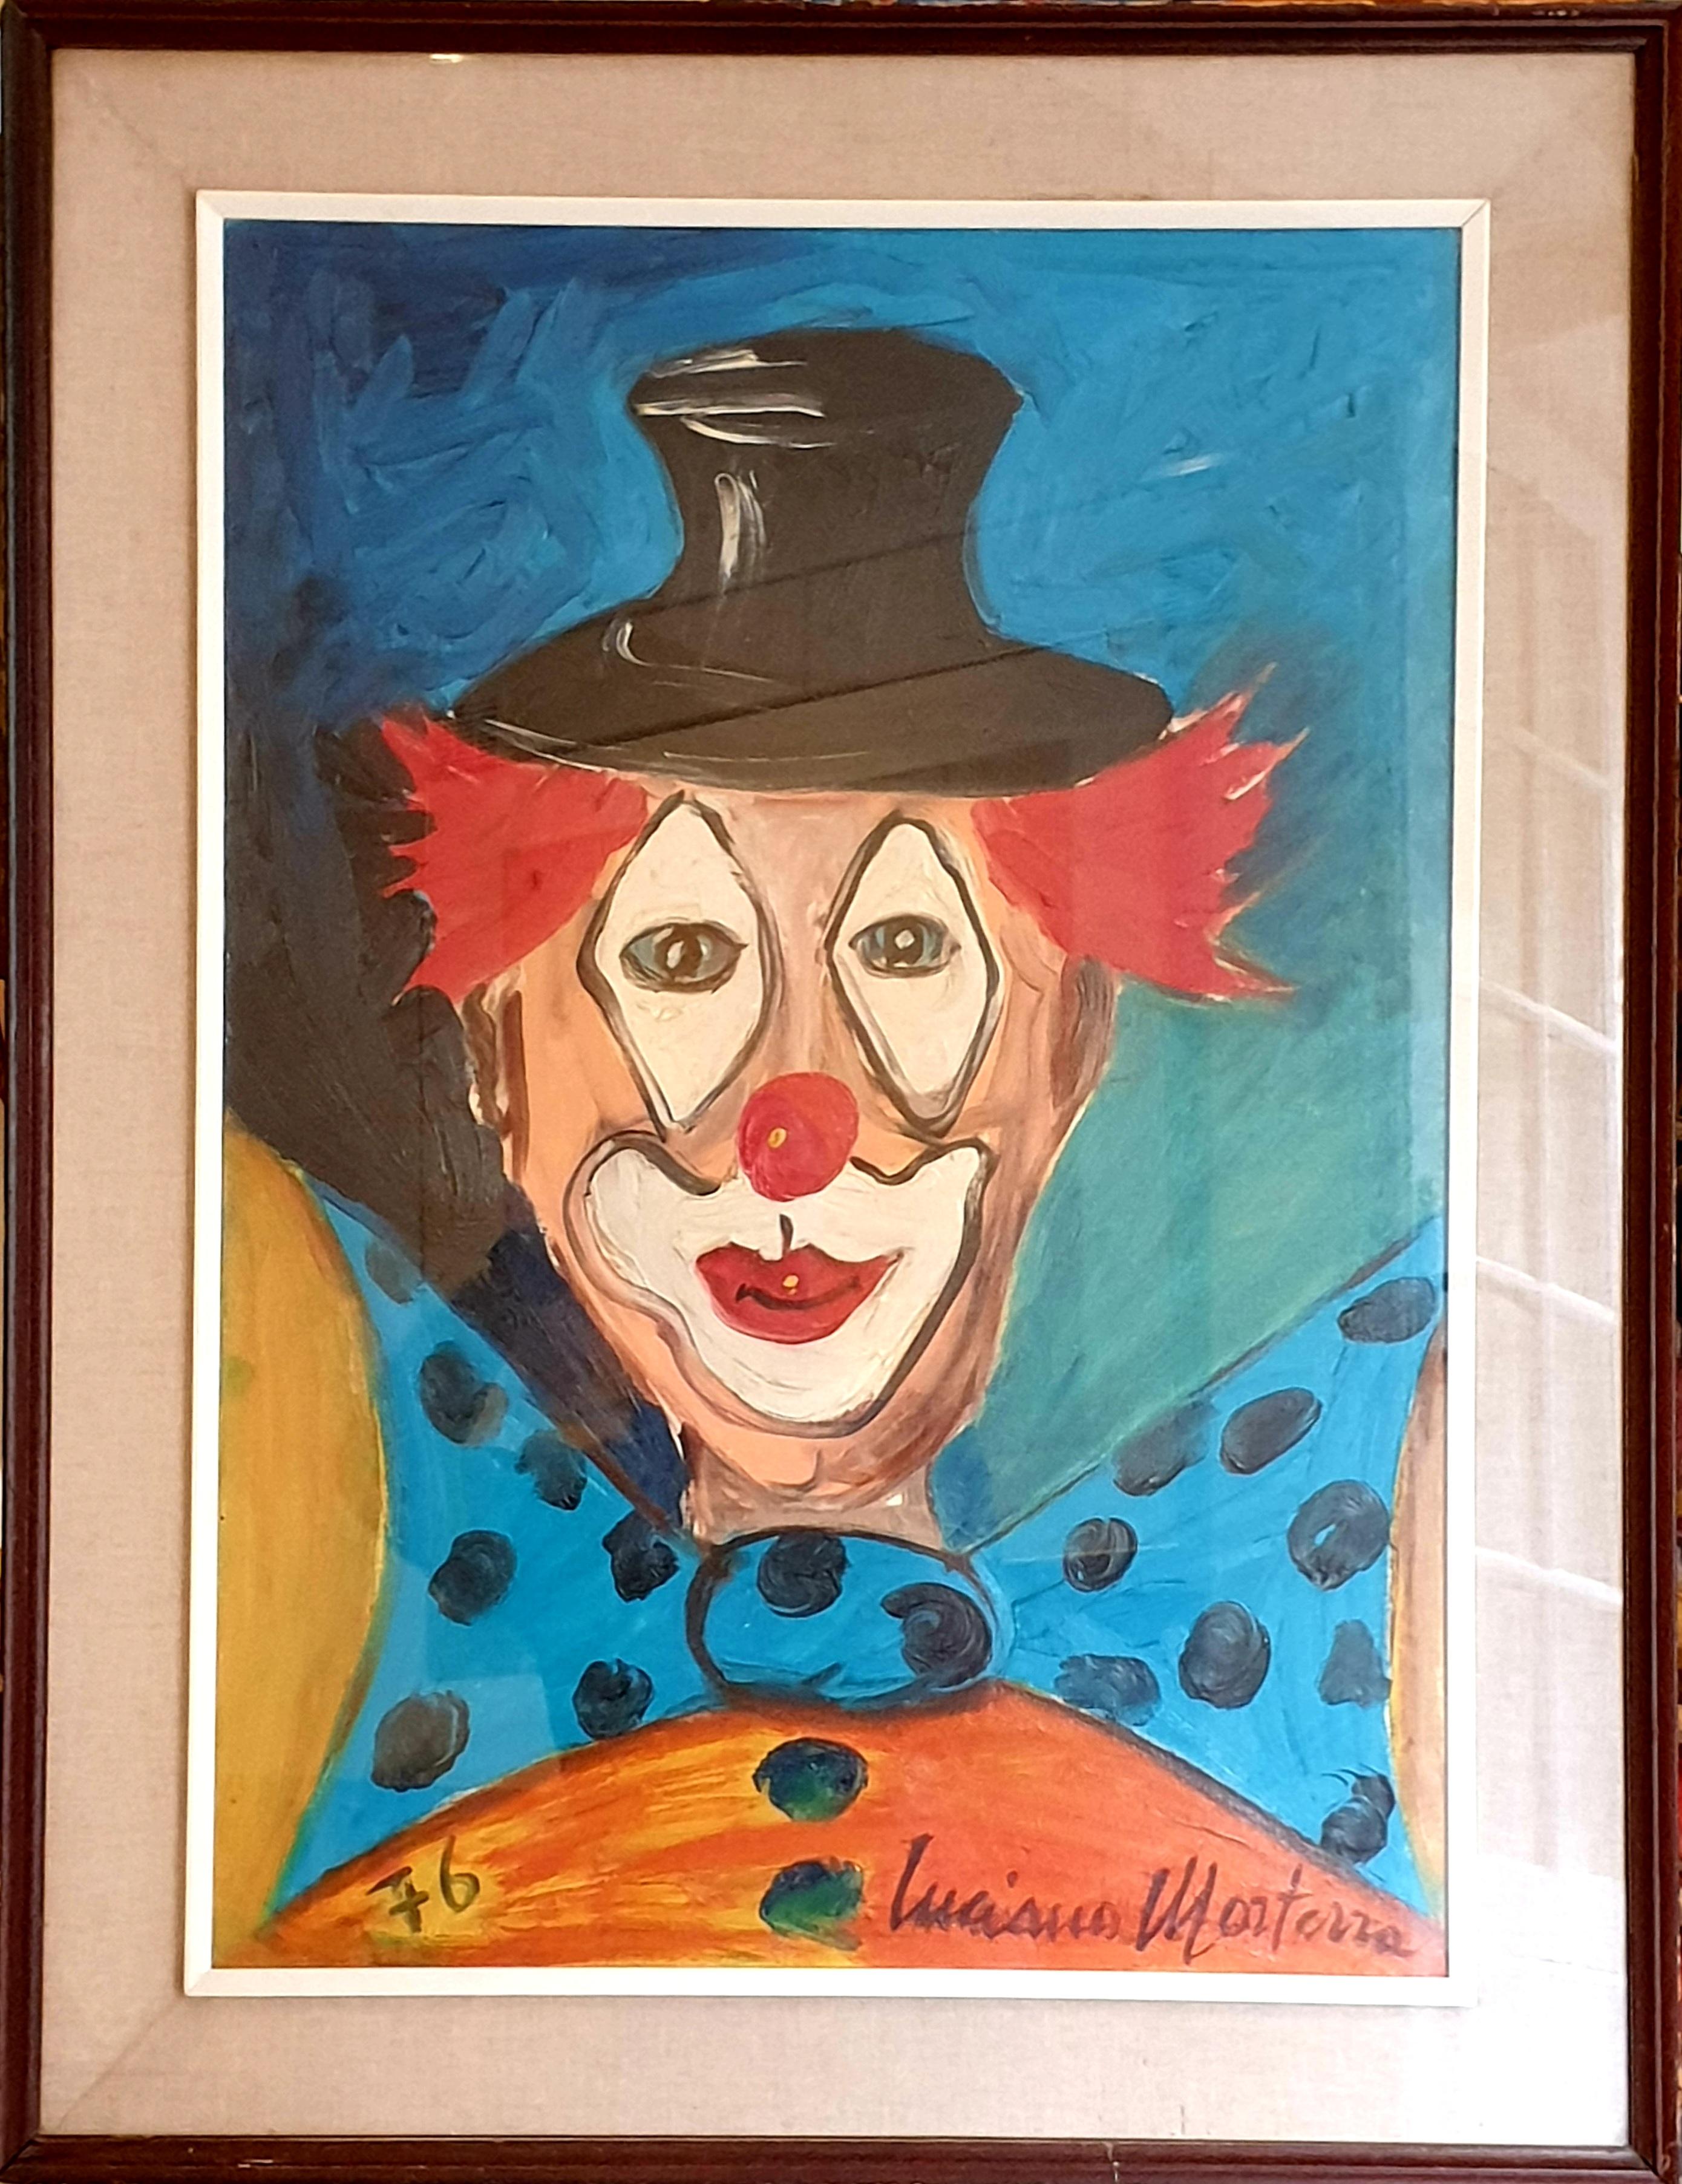 Luciano Morterra Portrait Painting - Coco the Clown in Top Hat and Bow Tie. Milan School, Italian Oil on Canvas.